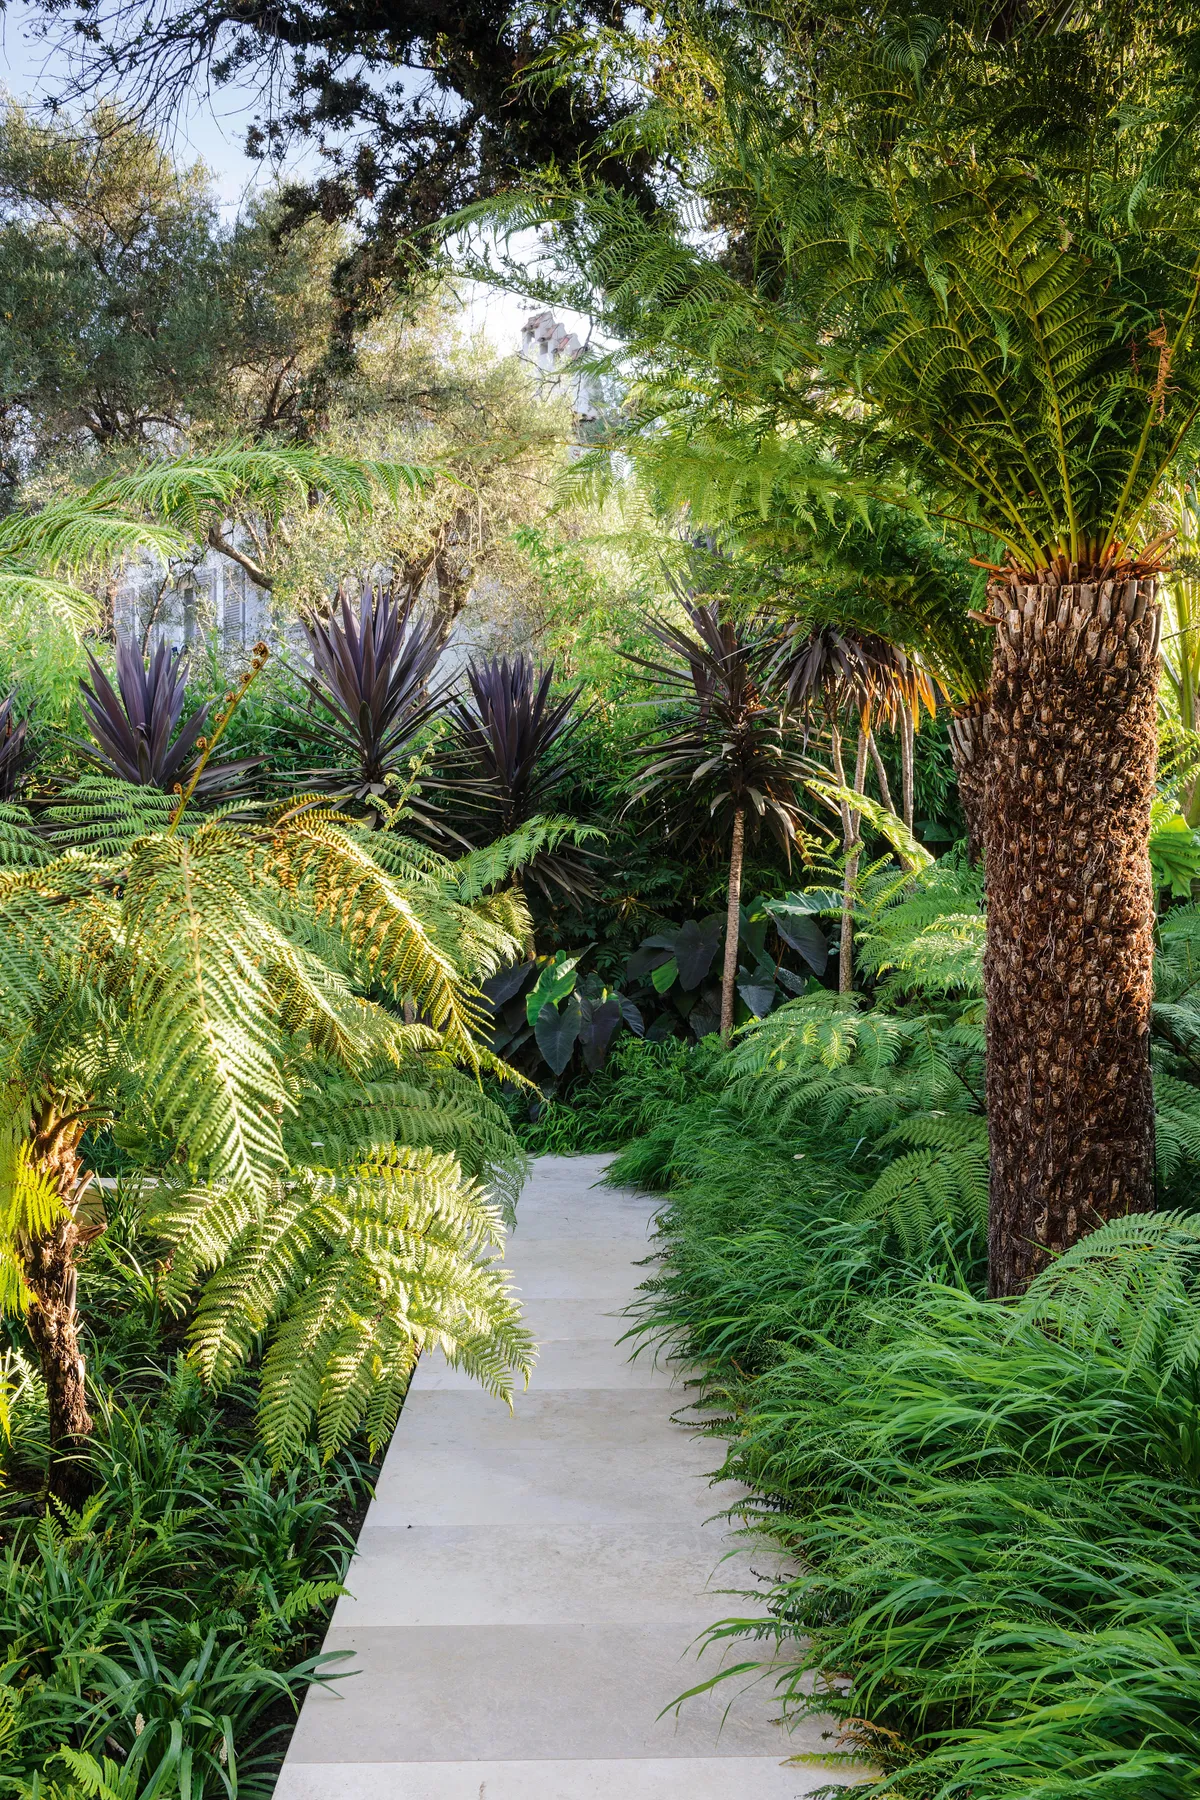 The pathway at the top of the garden leads through two types of tree fern (Dicksonia antarctica, right, and Cyathea australis, left) and is softened by the arching stems of ferns and Hakonechloa macra grass. Red-leaved Cordyline australis Purpurea Group, underplanted with Colocasia esculenta ‘Black Magic’, adds depth to the planting.